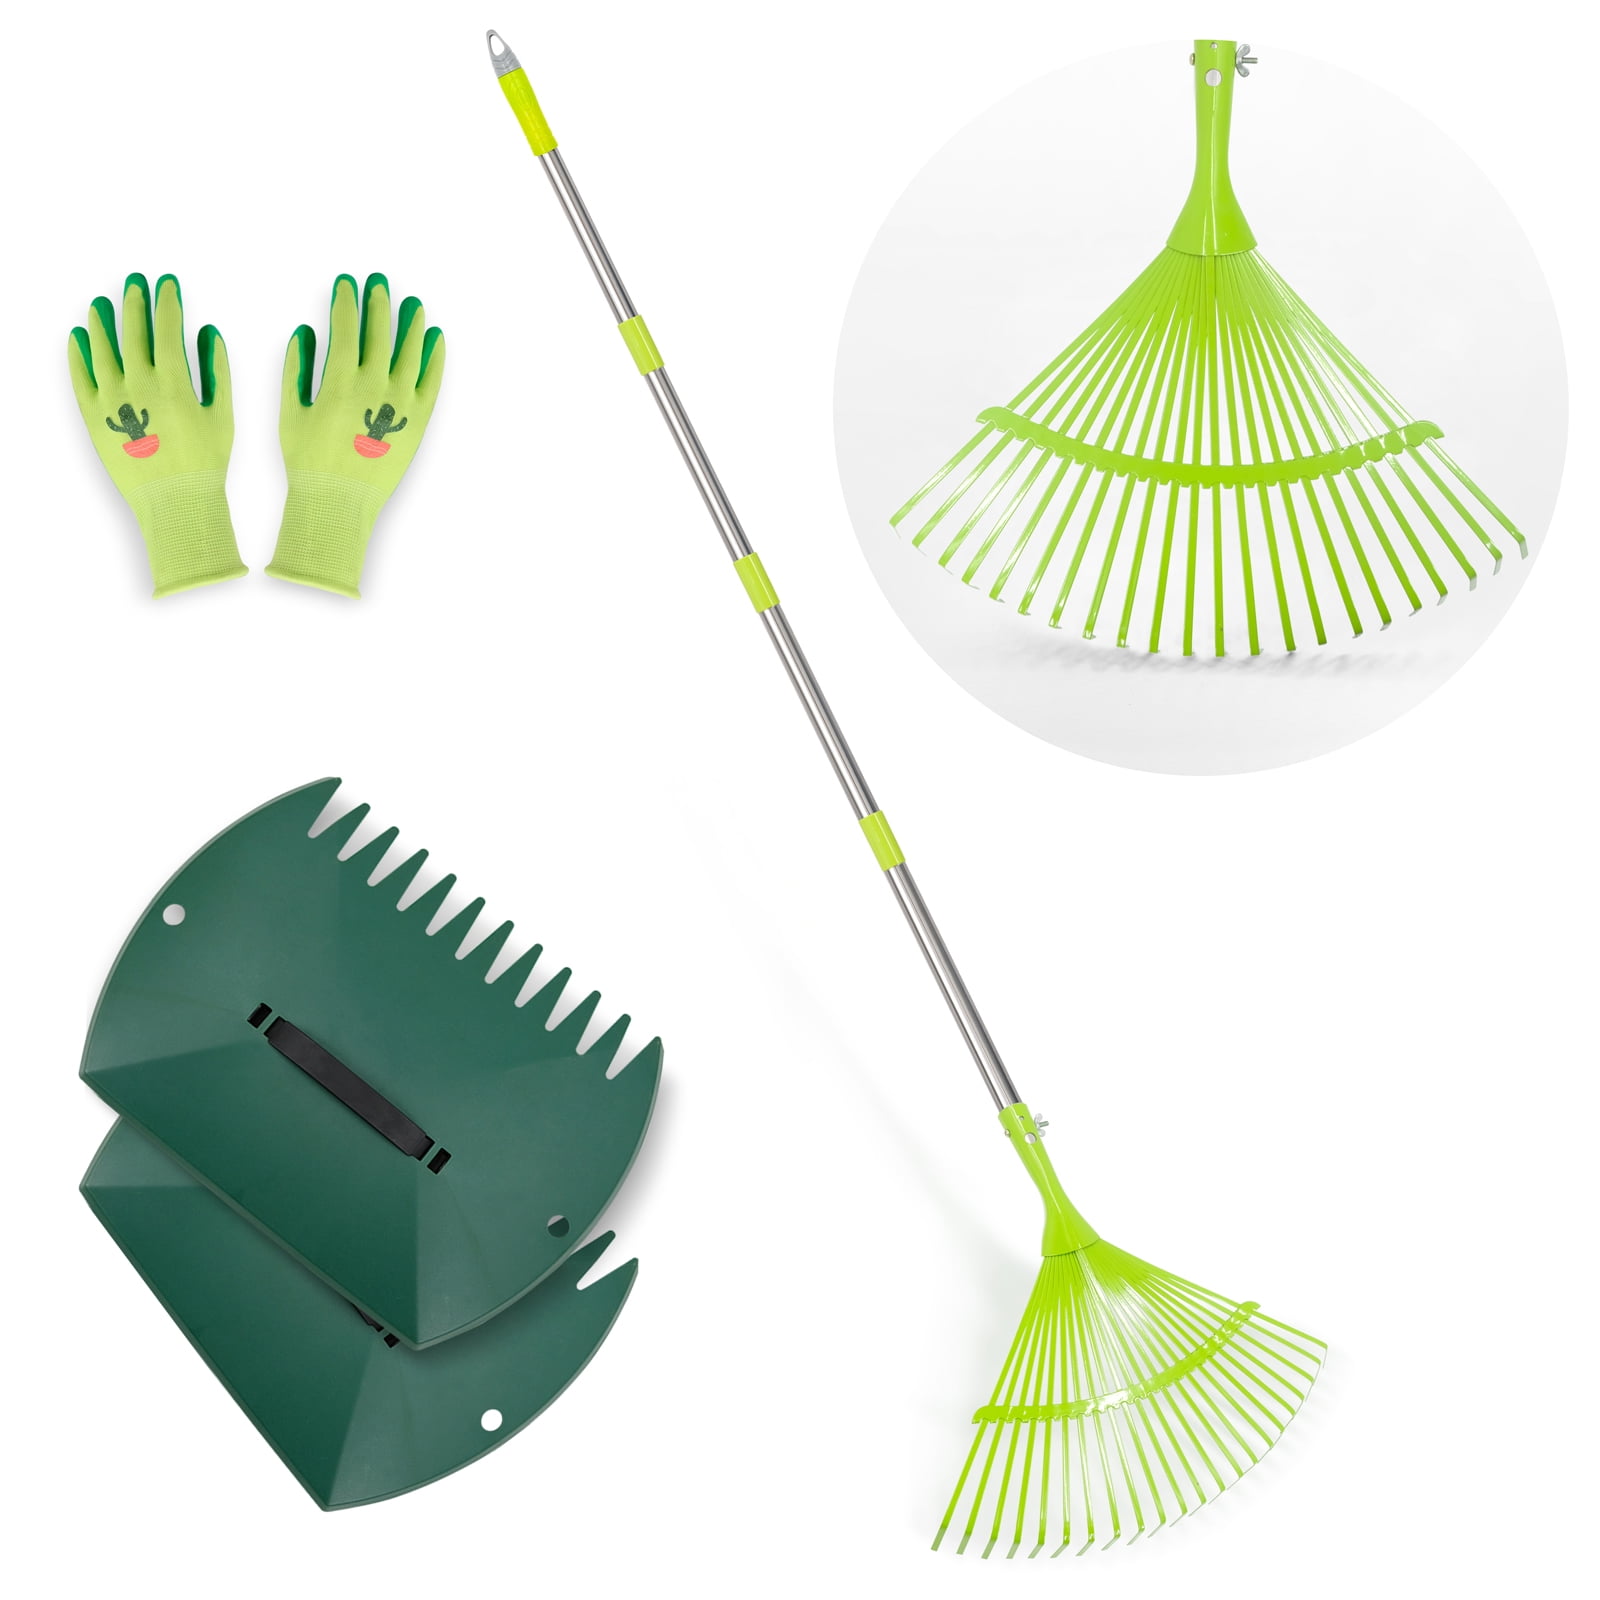 9 Tooth Adjustable Hoe Garden Grass Leaf Rake Folding P7A2 Tool De Cleaning Y8E5 